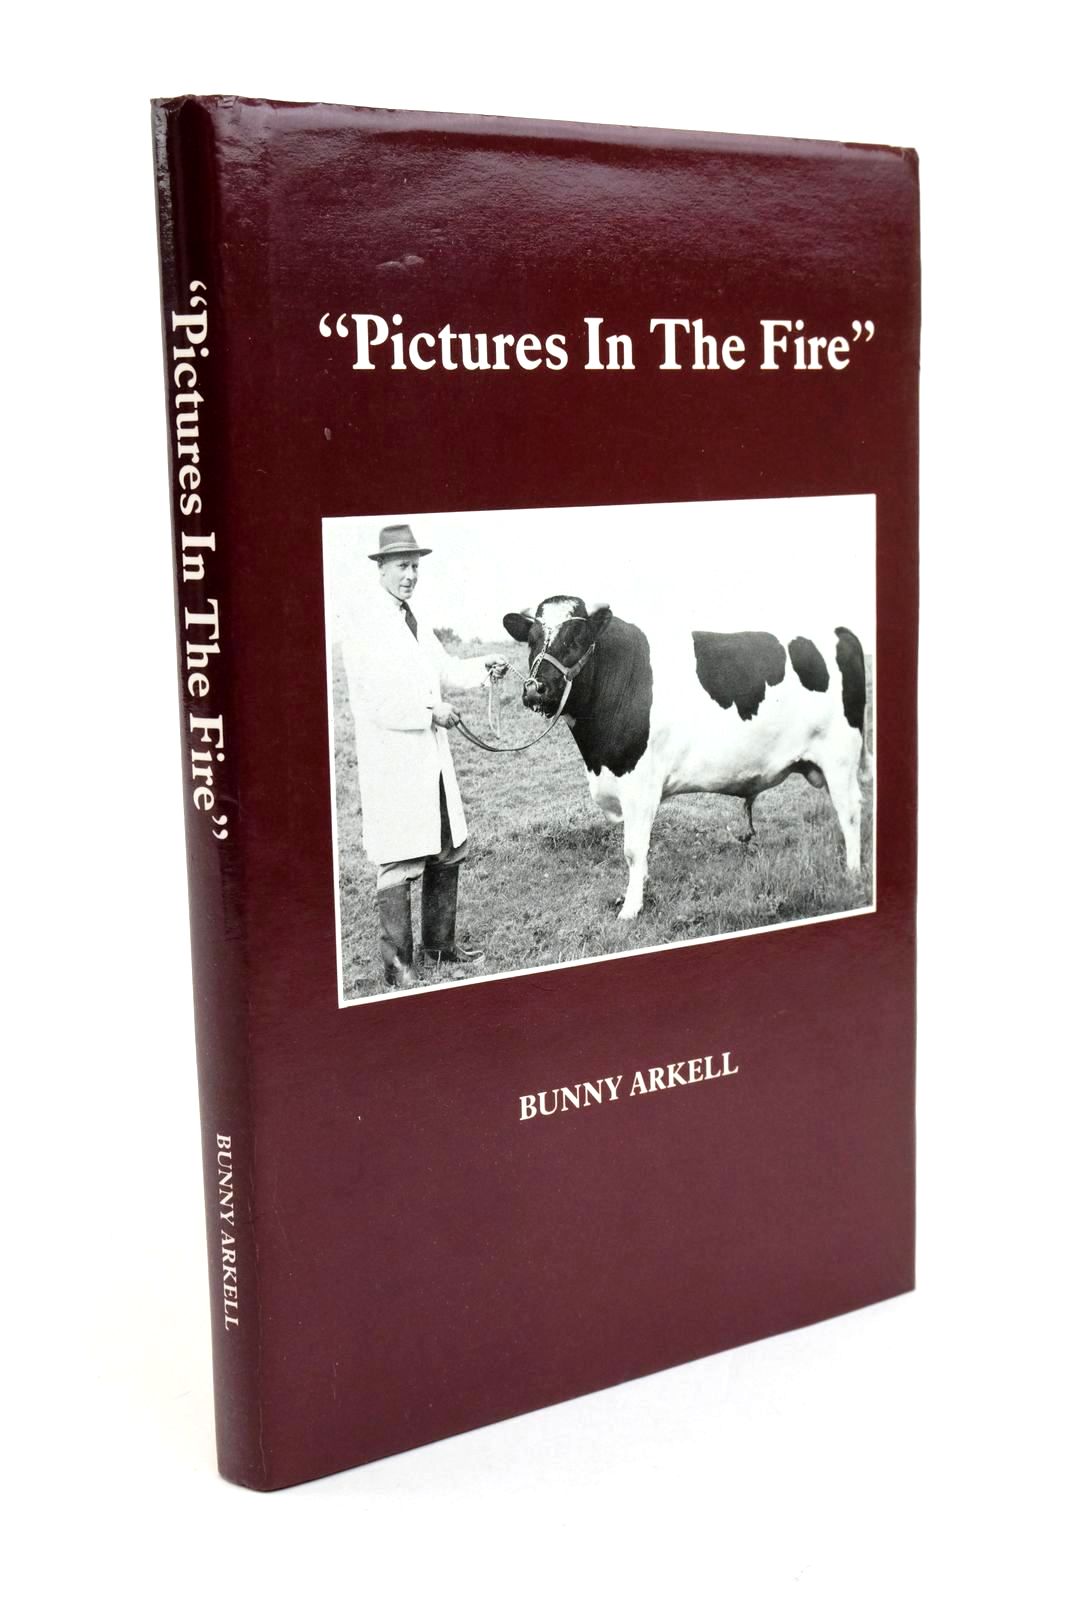 Photo of PICTURES IN THE FIRE written by Arkell, Bunny published by B.A. Hathaway Printers (STOCK CODE: 1322292)  for sale by Stella & Rose's Books